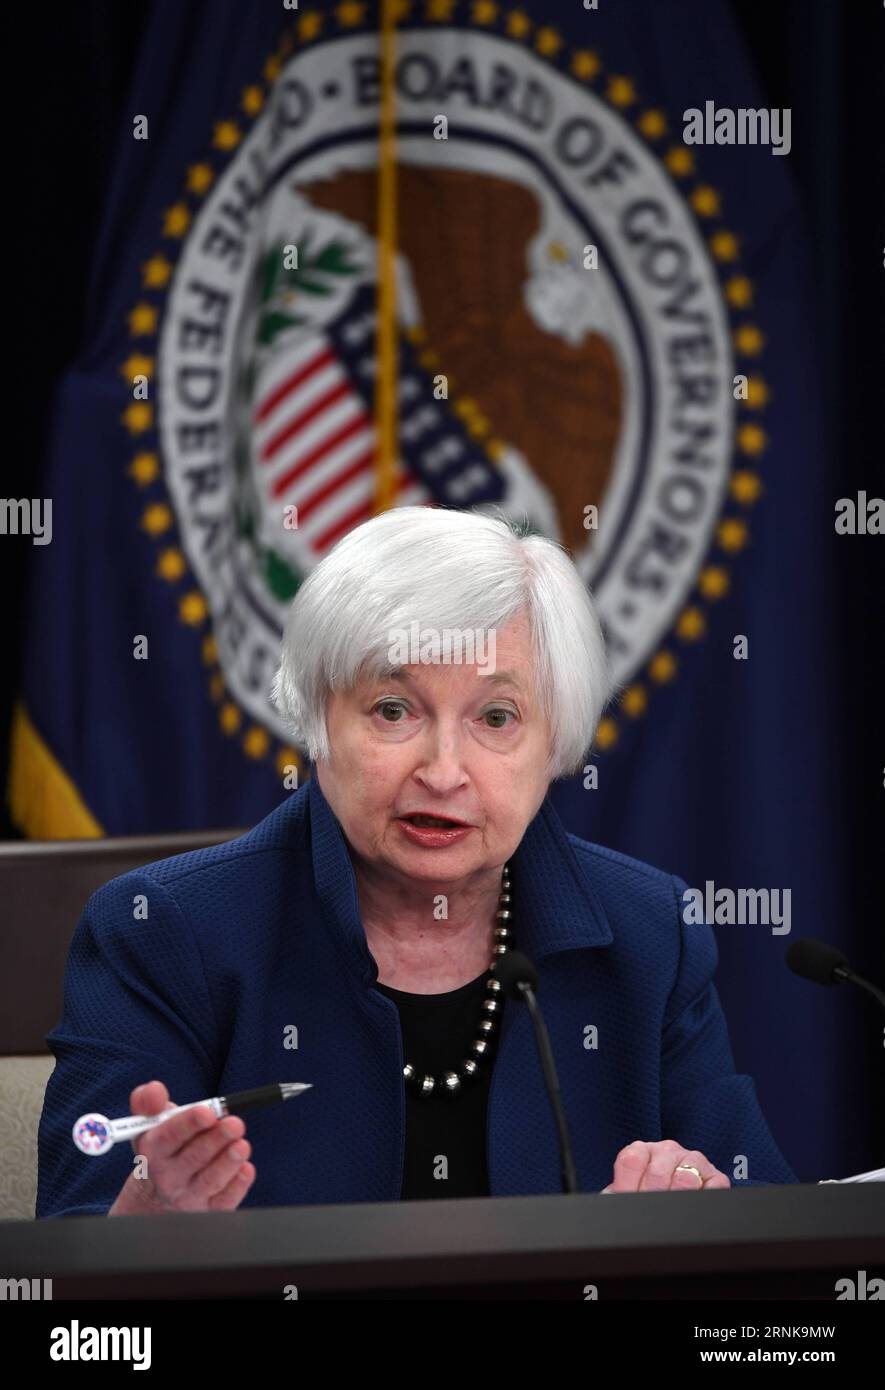 170315 -- WASHINGTON, March 15, 2017 -- U.S. Federal Reserve Chair Janet Yellen speaks during a news conference in Washington D.C., capital of the United States, on March 15, 2017. U.S. Federal Reserve on Wednesday raised interest rates for the third time since the 2008 global financial crisis, with the job market strengthening and inflation rising toward its target.  U.S.-WASHINGTON D.C.-FEDERAL RESERVE-INTEREST RATES-RAISING YinxBogu PUBLICATIONxNOTxINxCHN Stock Photo